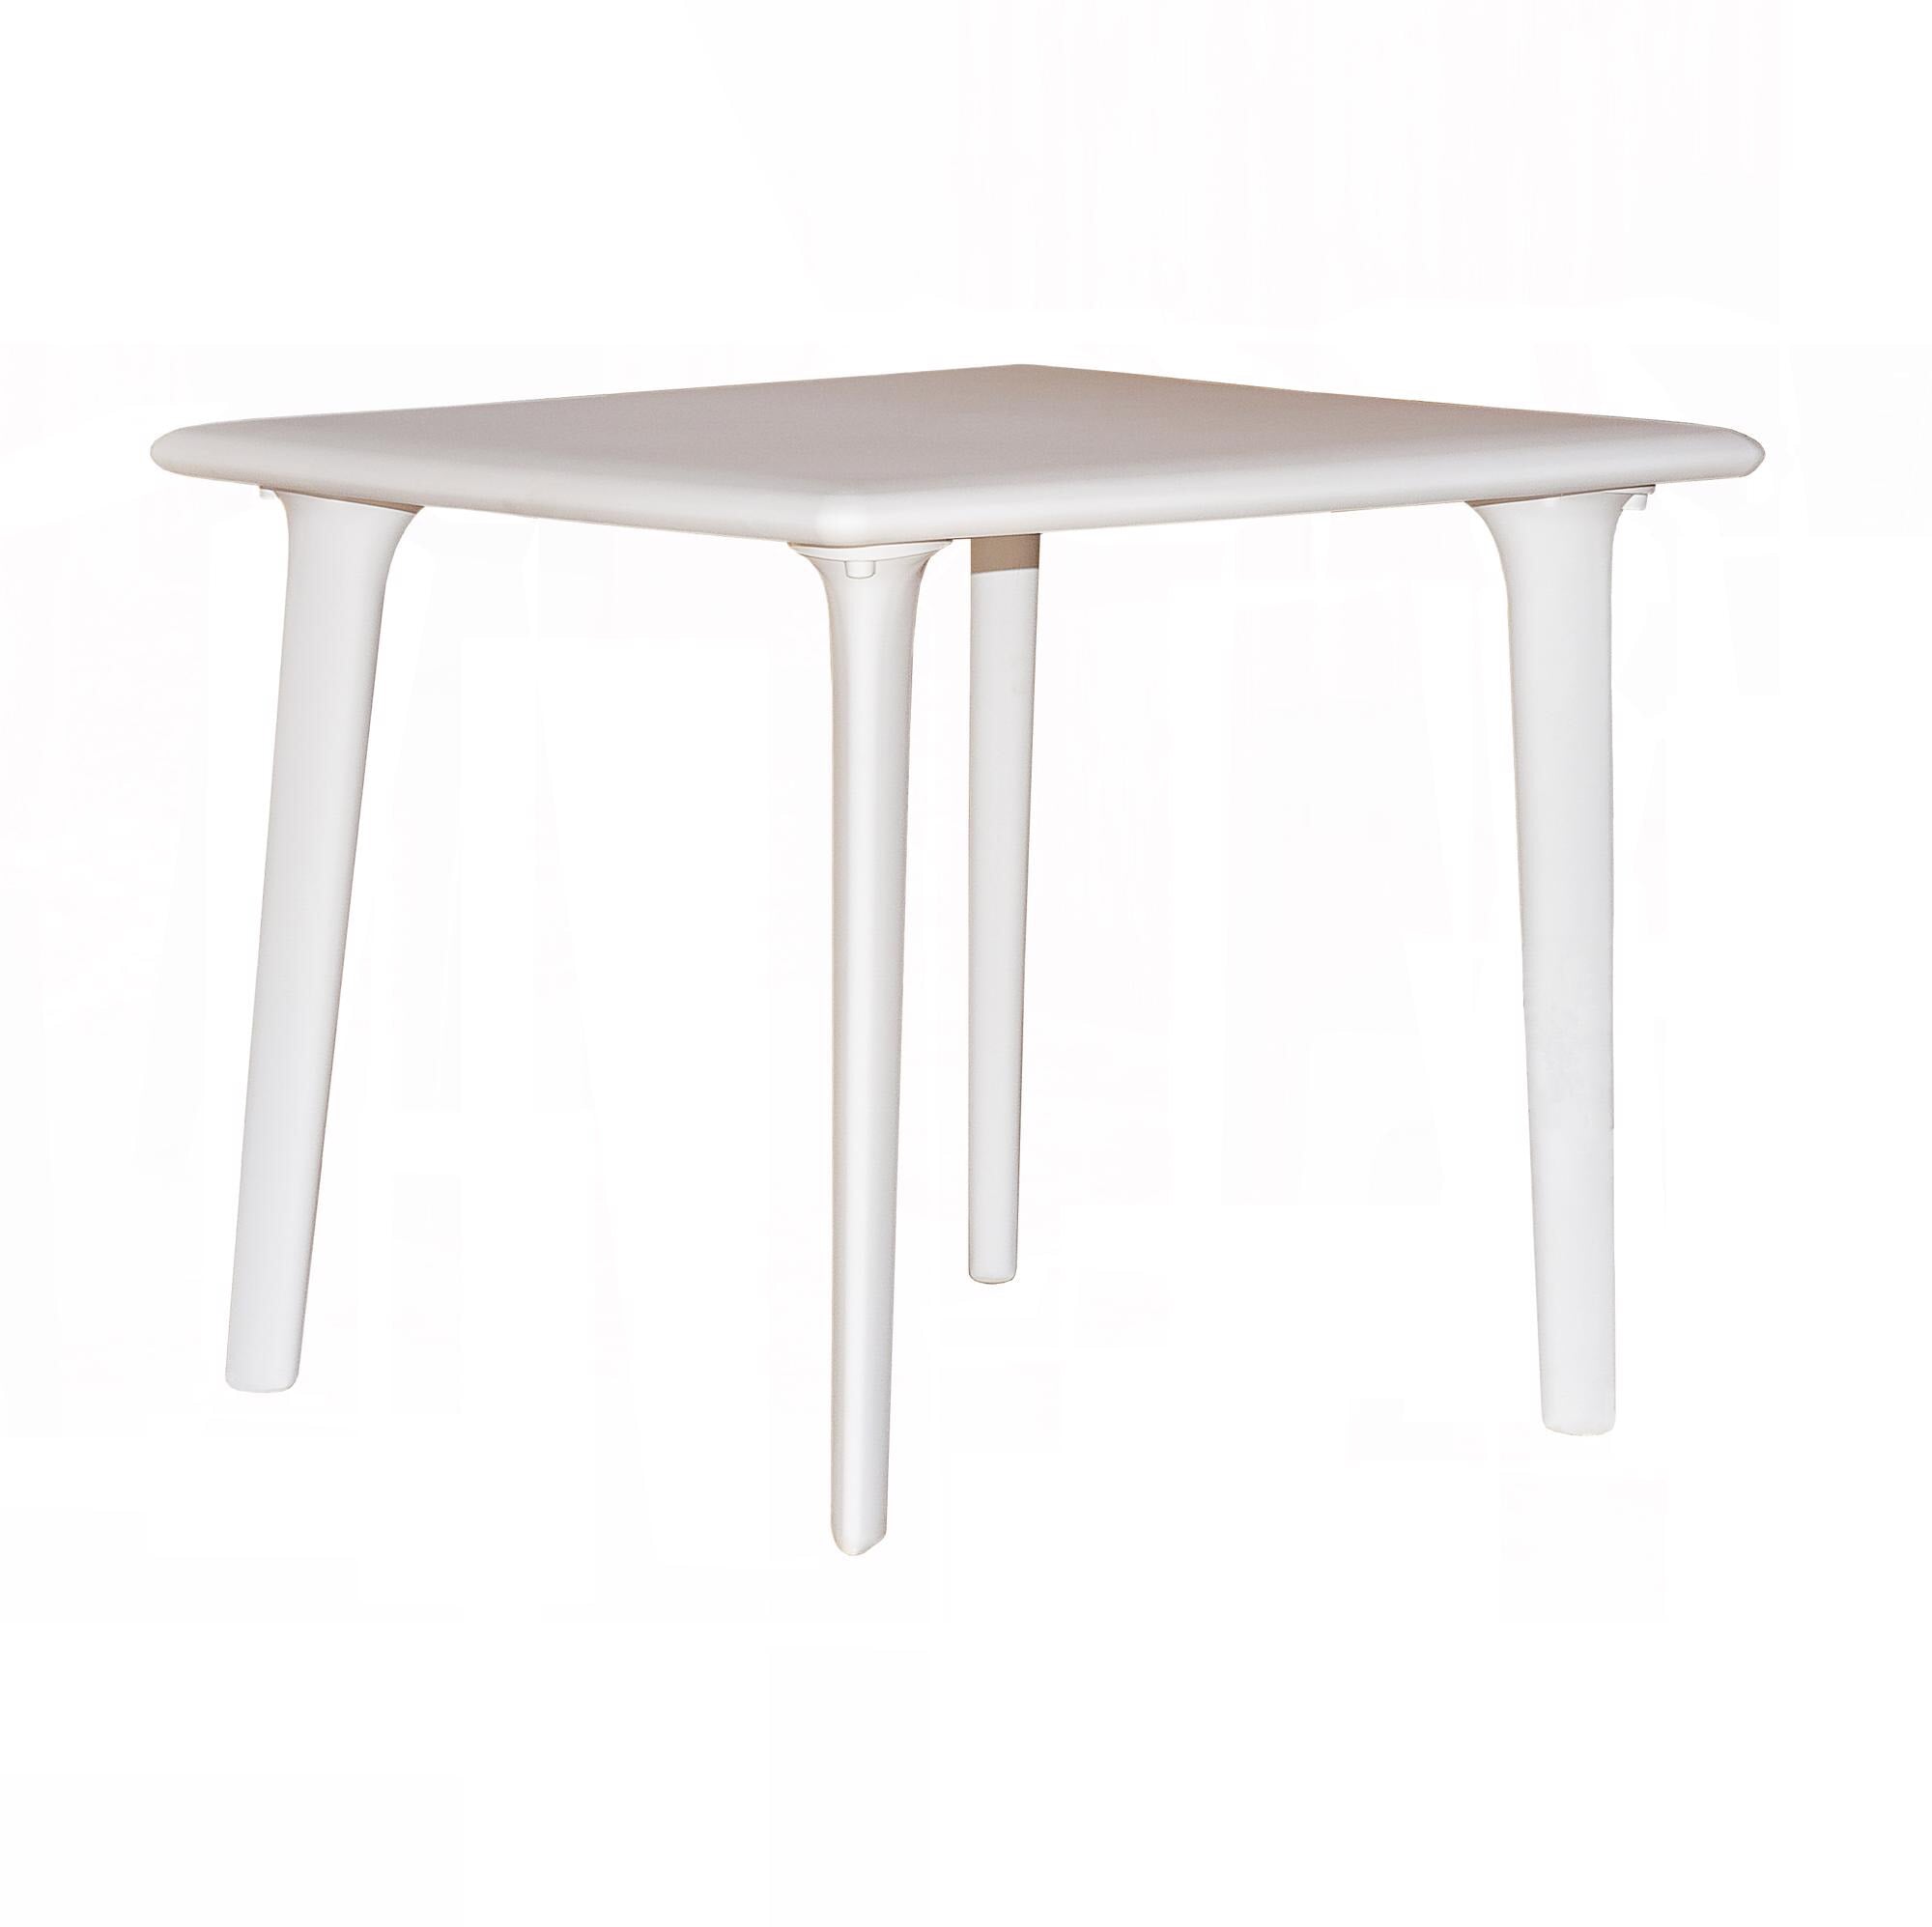 Resol new dessa square table indoors, outdoor 90x90 white